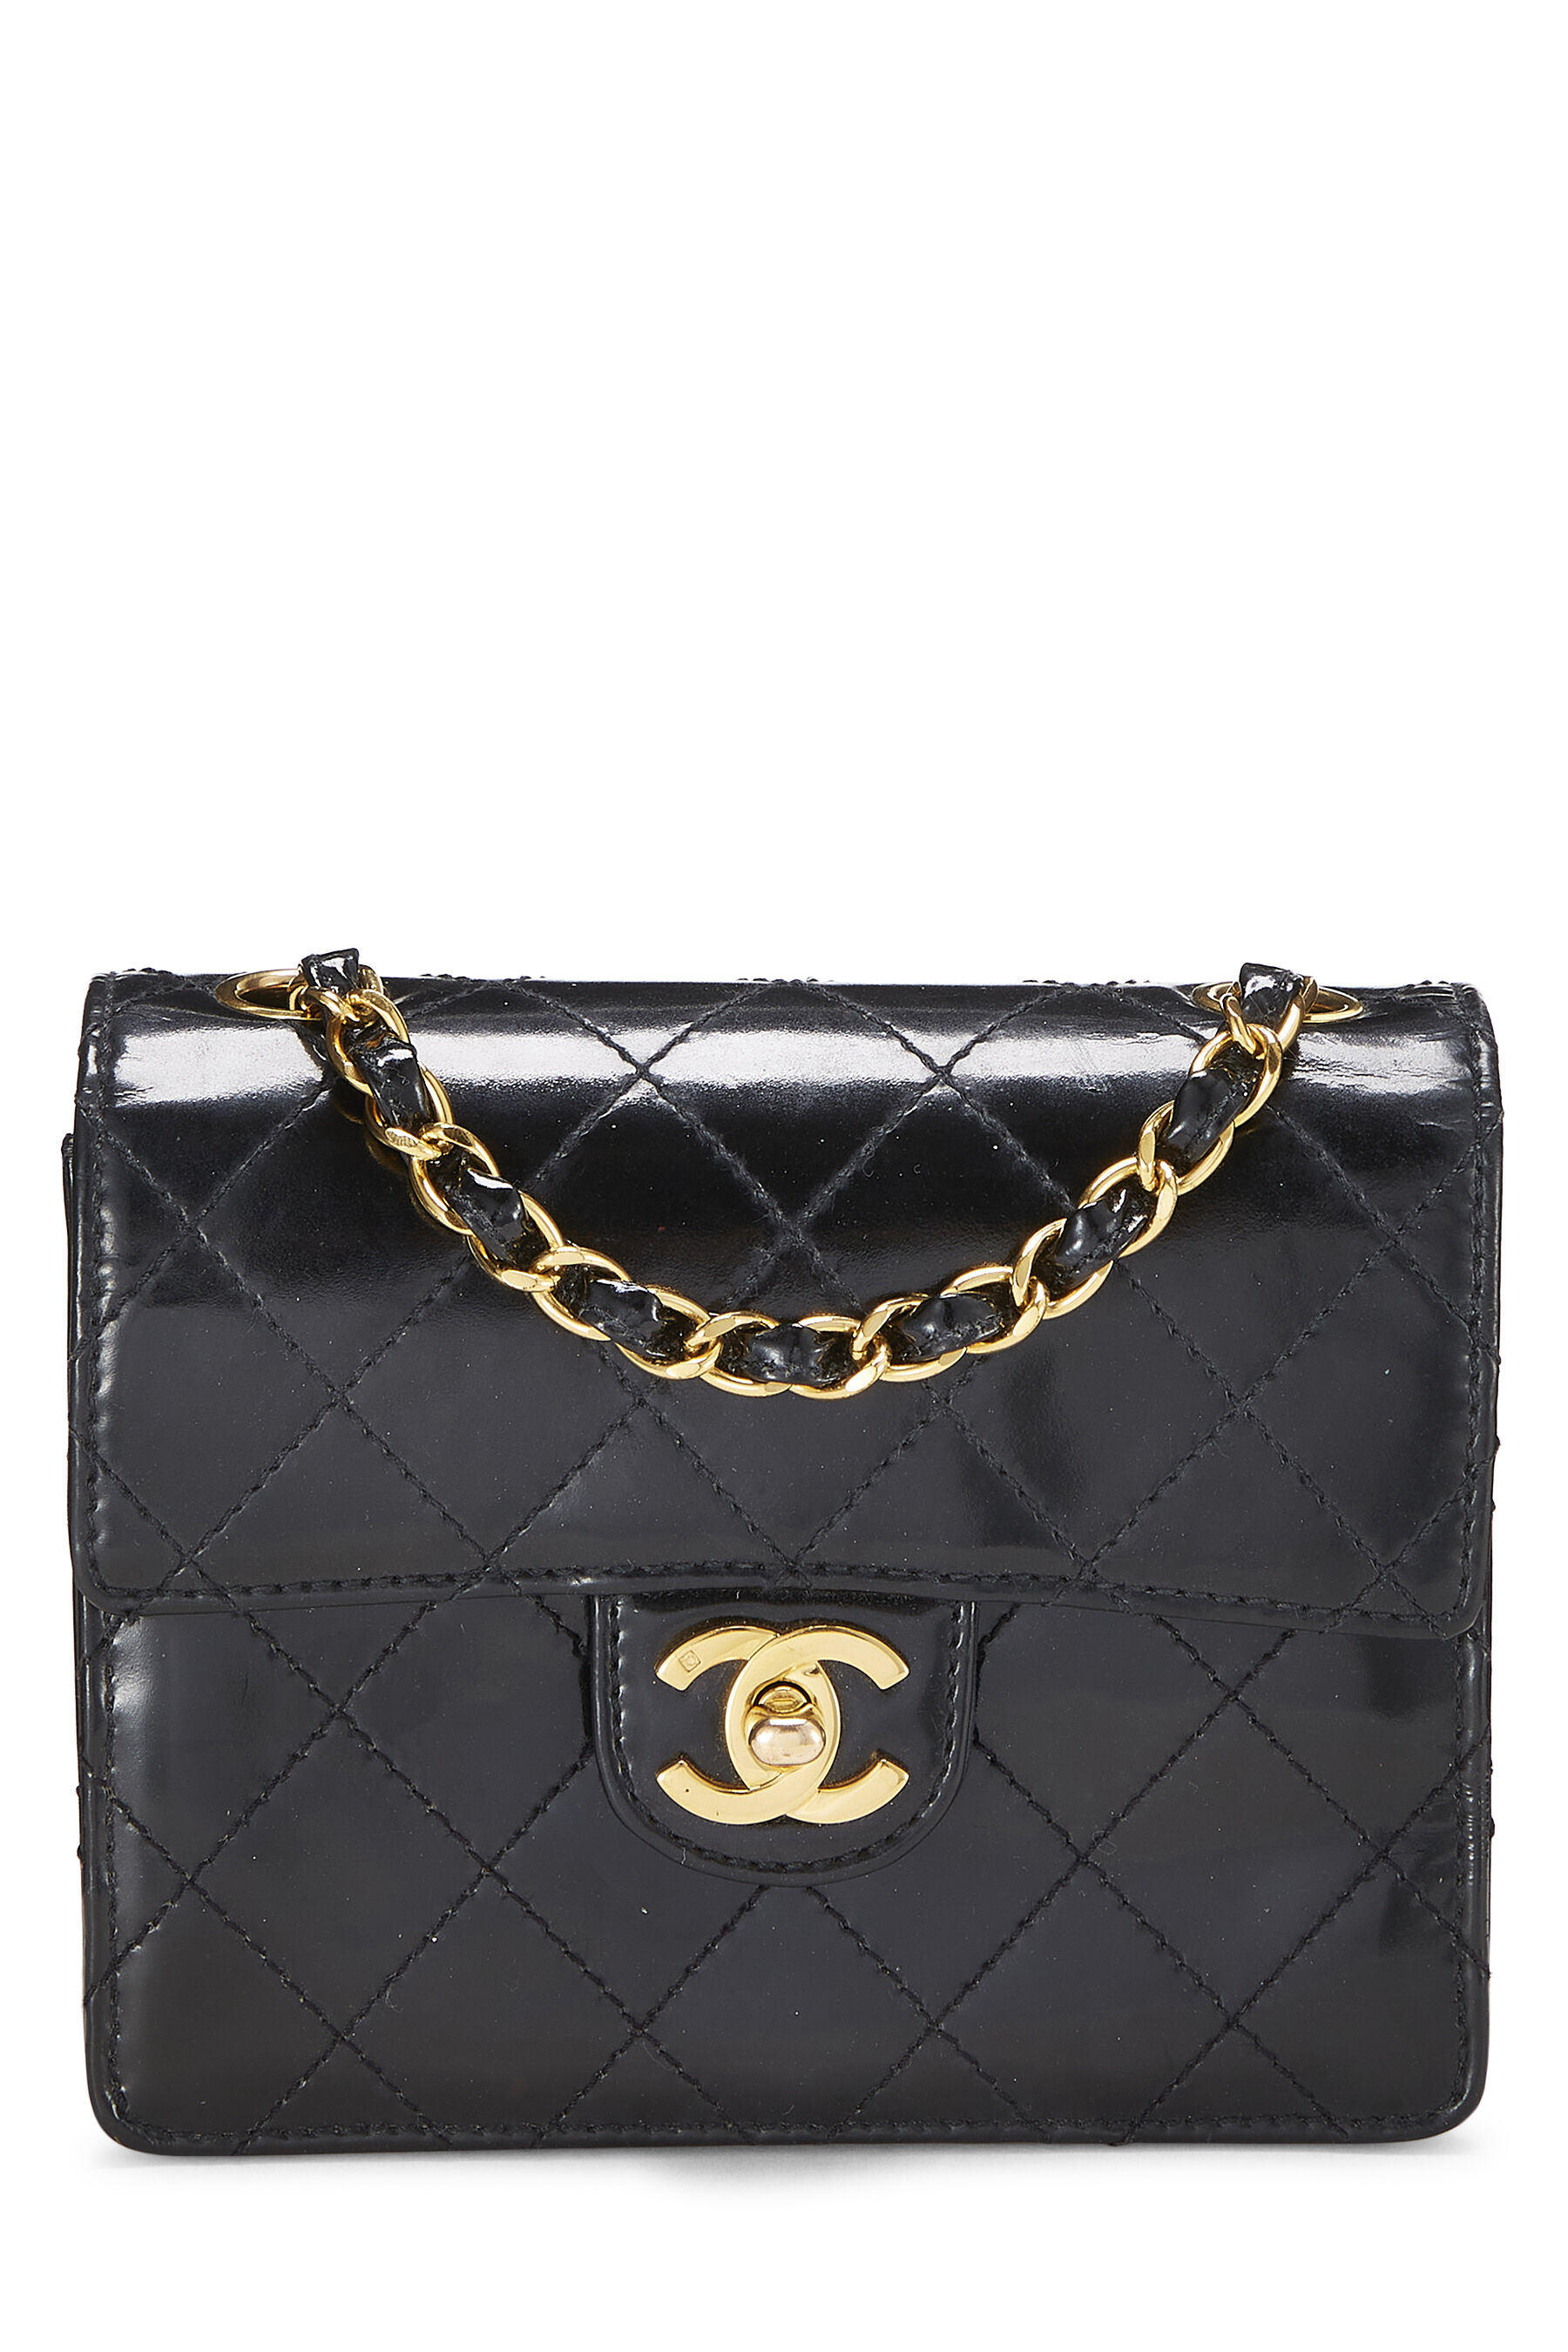 Chanel - Black Quilted Patent Leather Classic Square Flap Mini